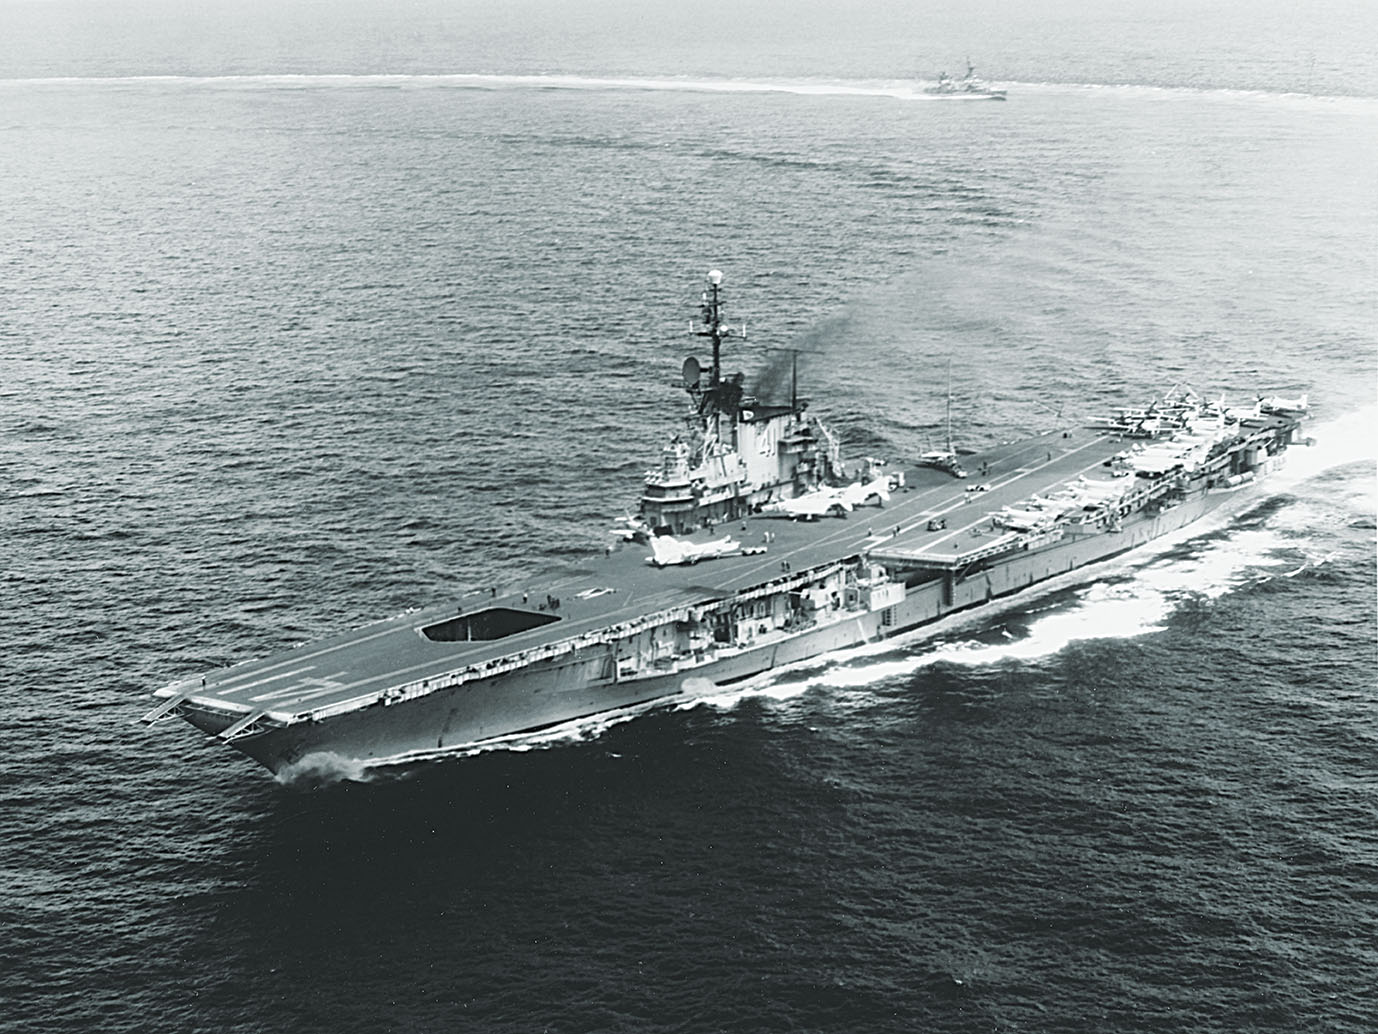 Operating in the South China Sea in October 1965, Midway displays the added angled deck that extended its usefulness. / Naval History and Heritage Command